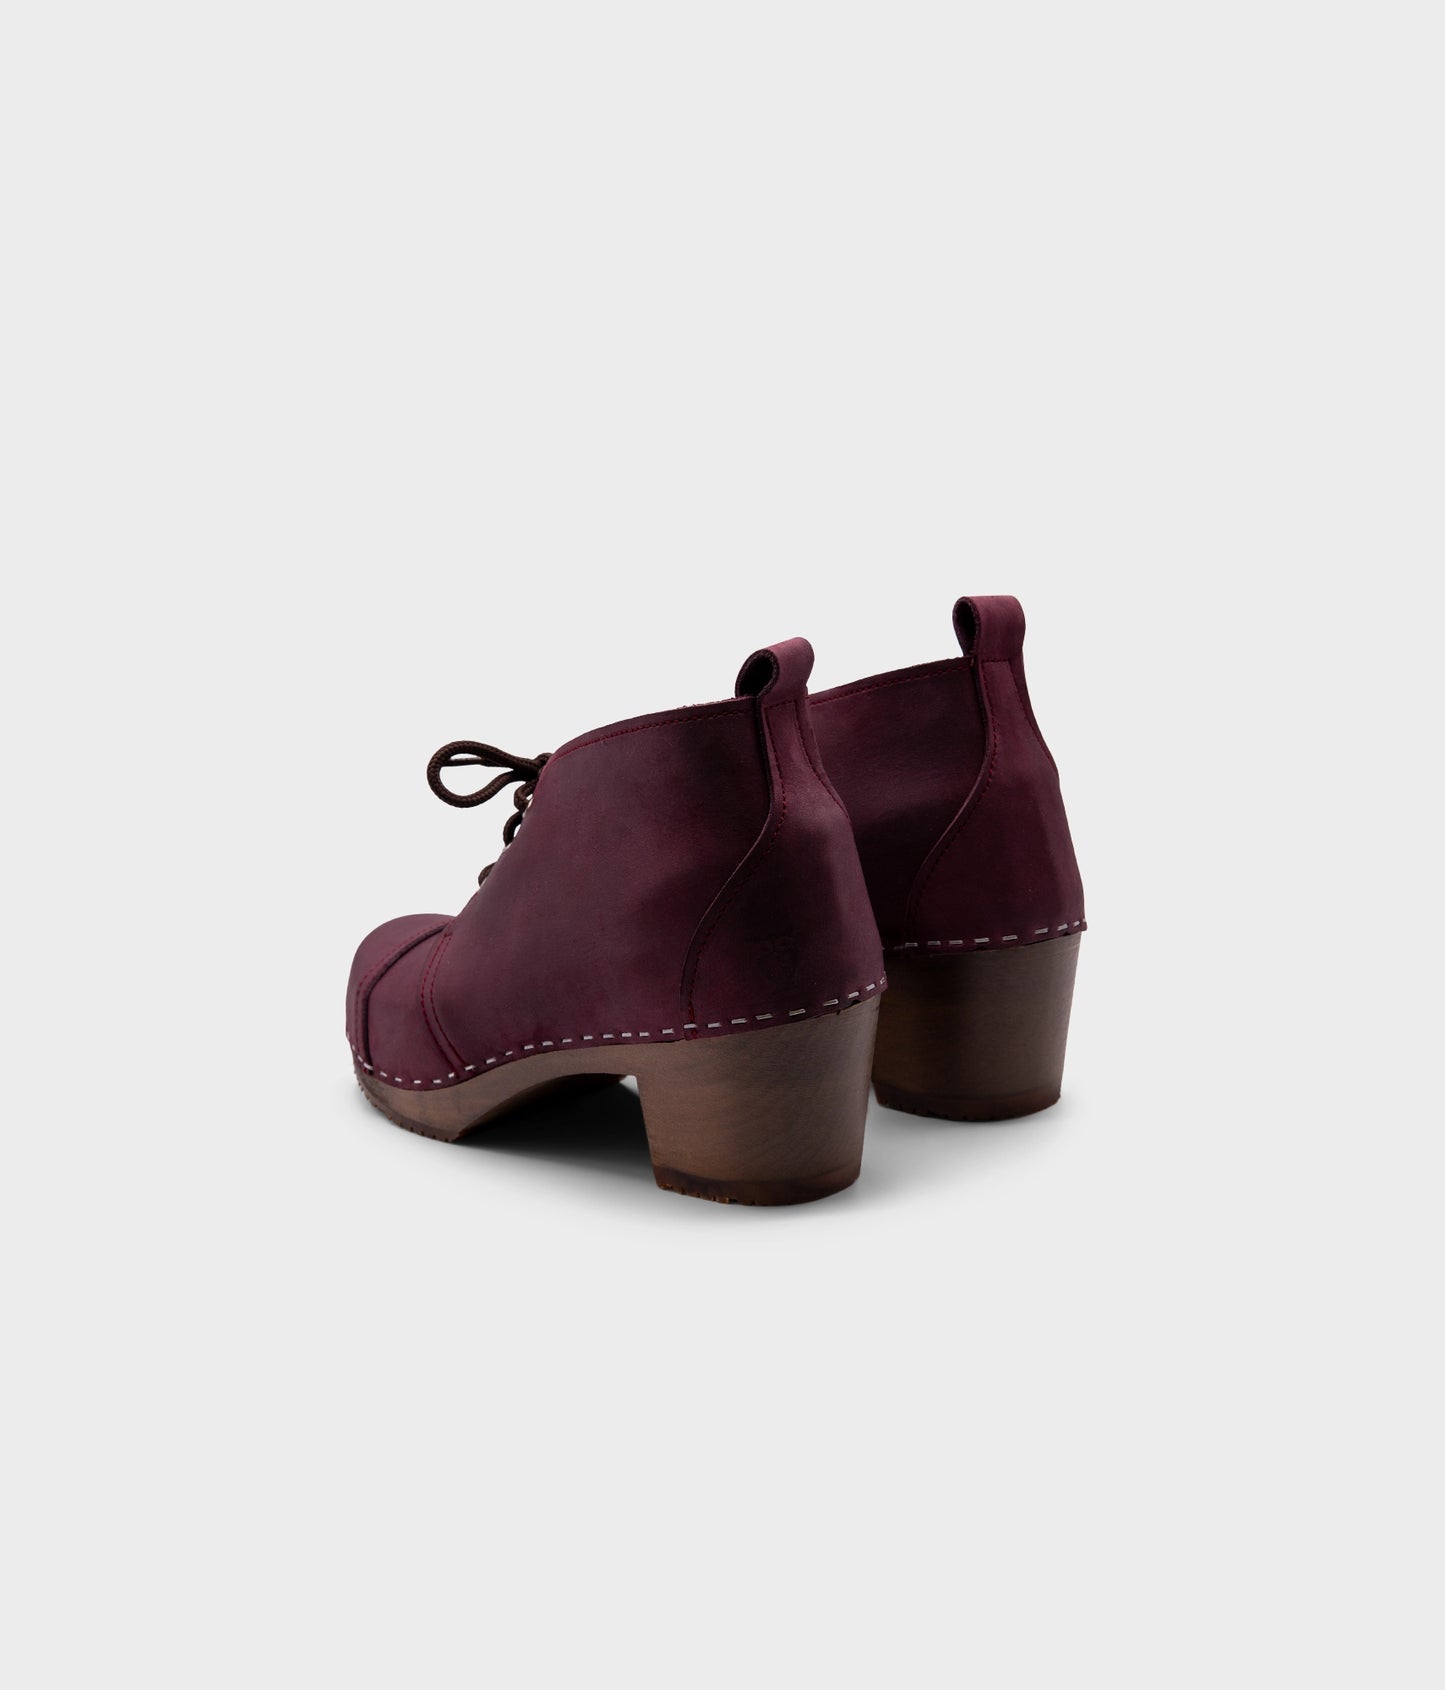 high heeled chukka clog boots in purple plum nubuck leather stapled on a dark wooden base with brown laces